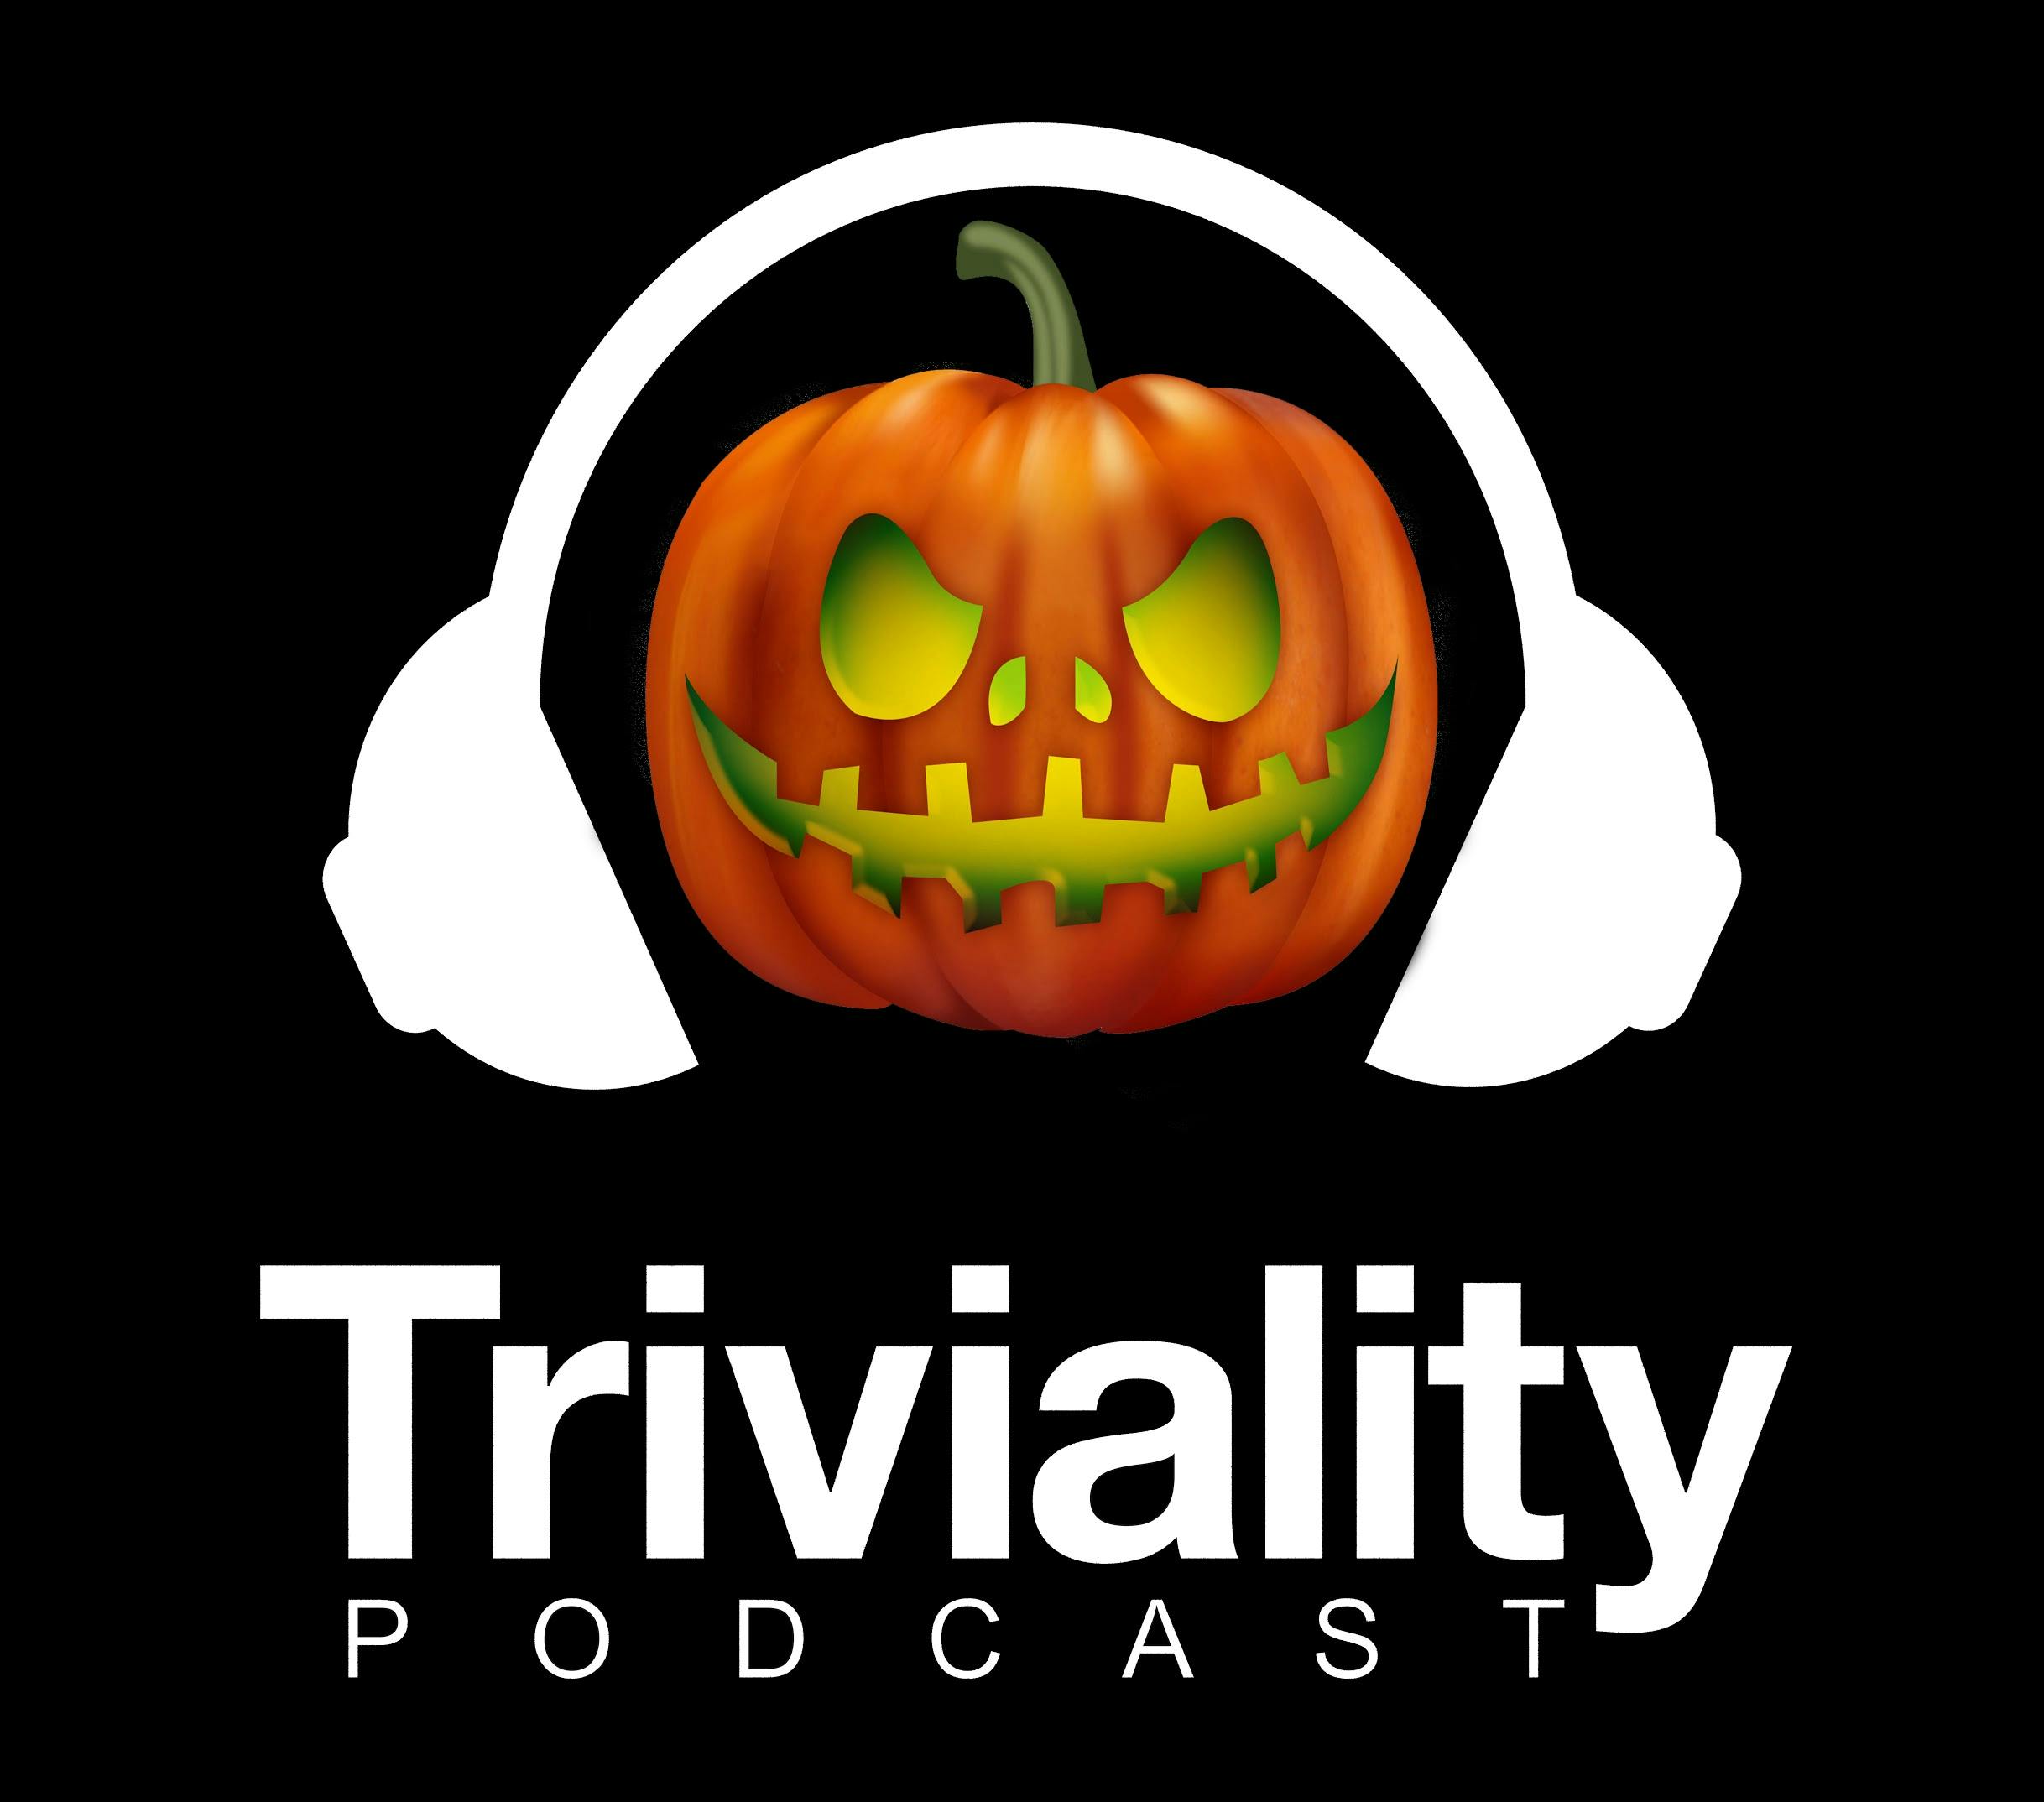 130: Trick or Triviality III: The Final Chapter